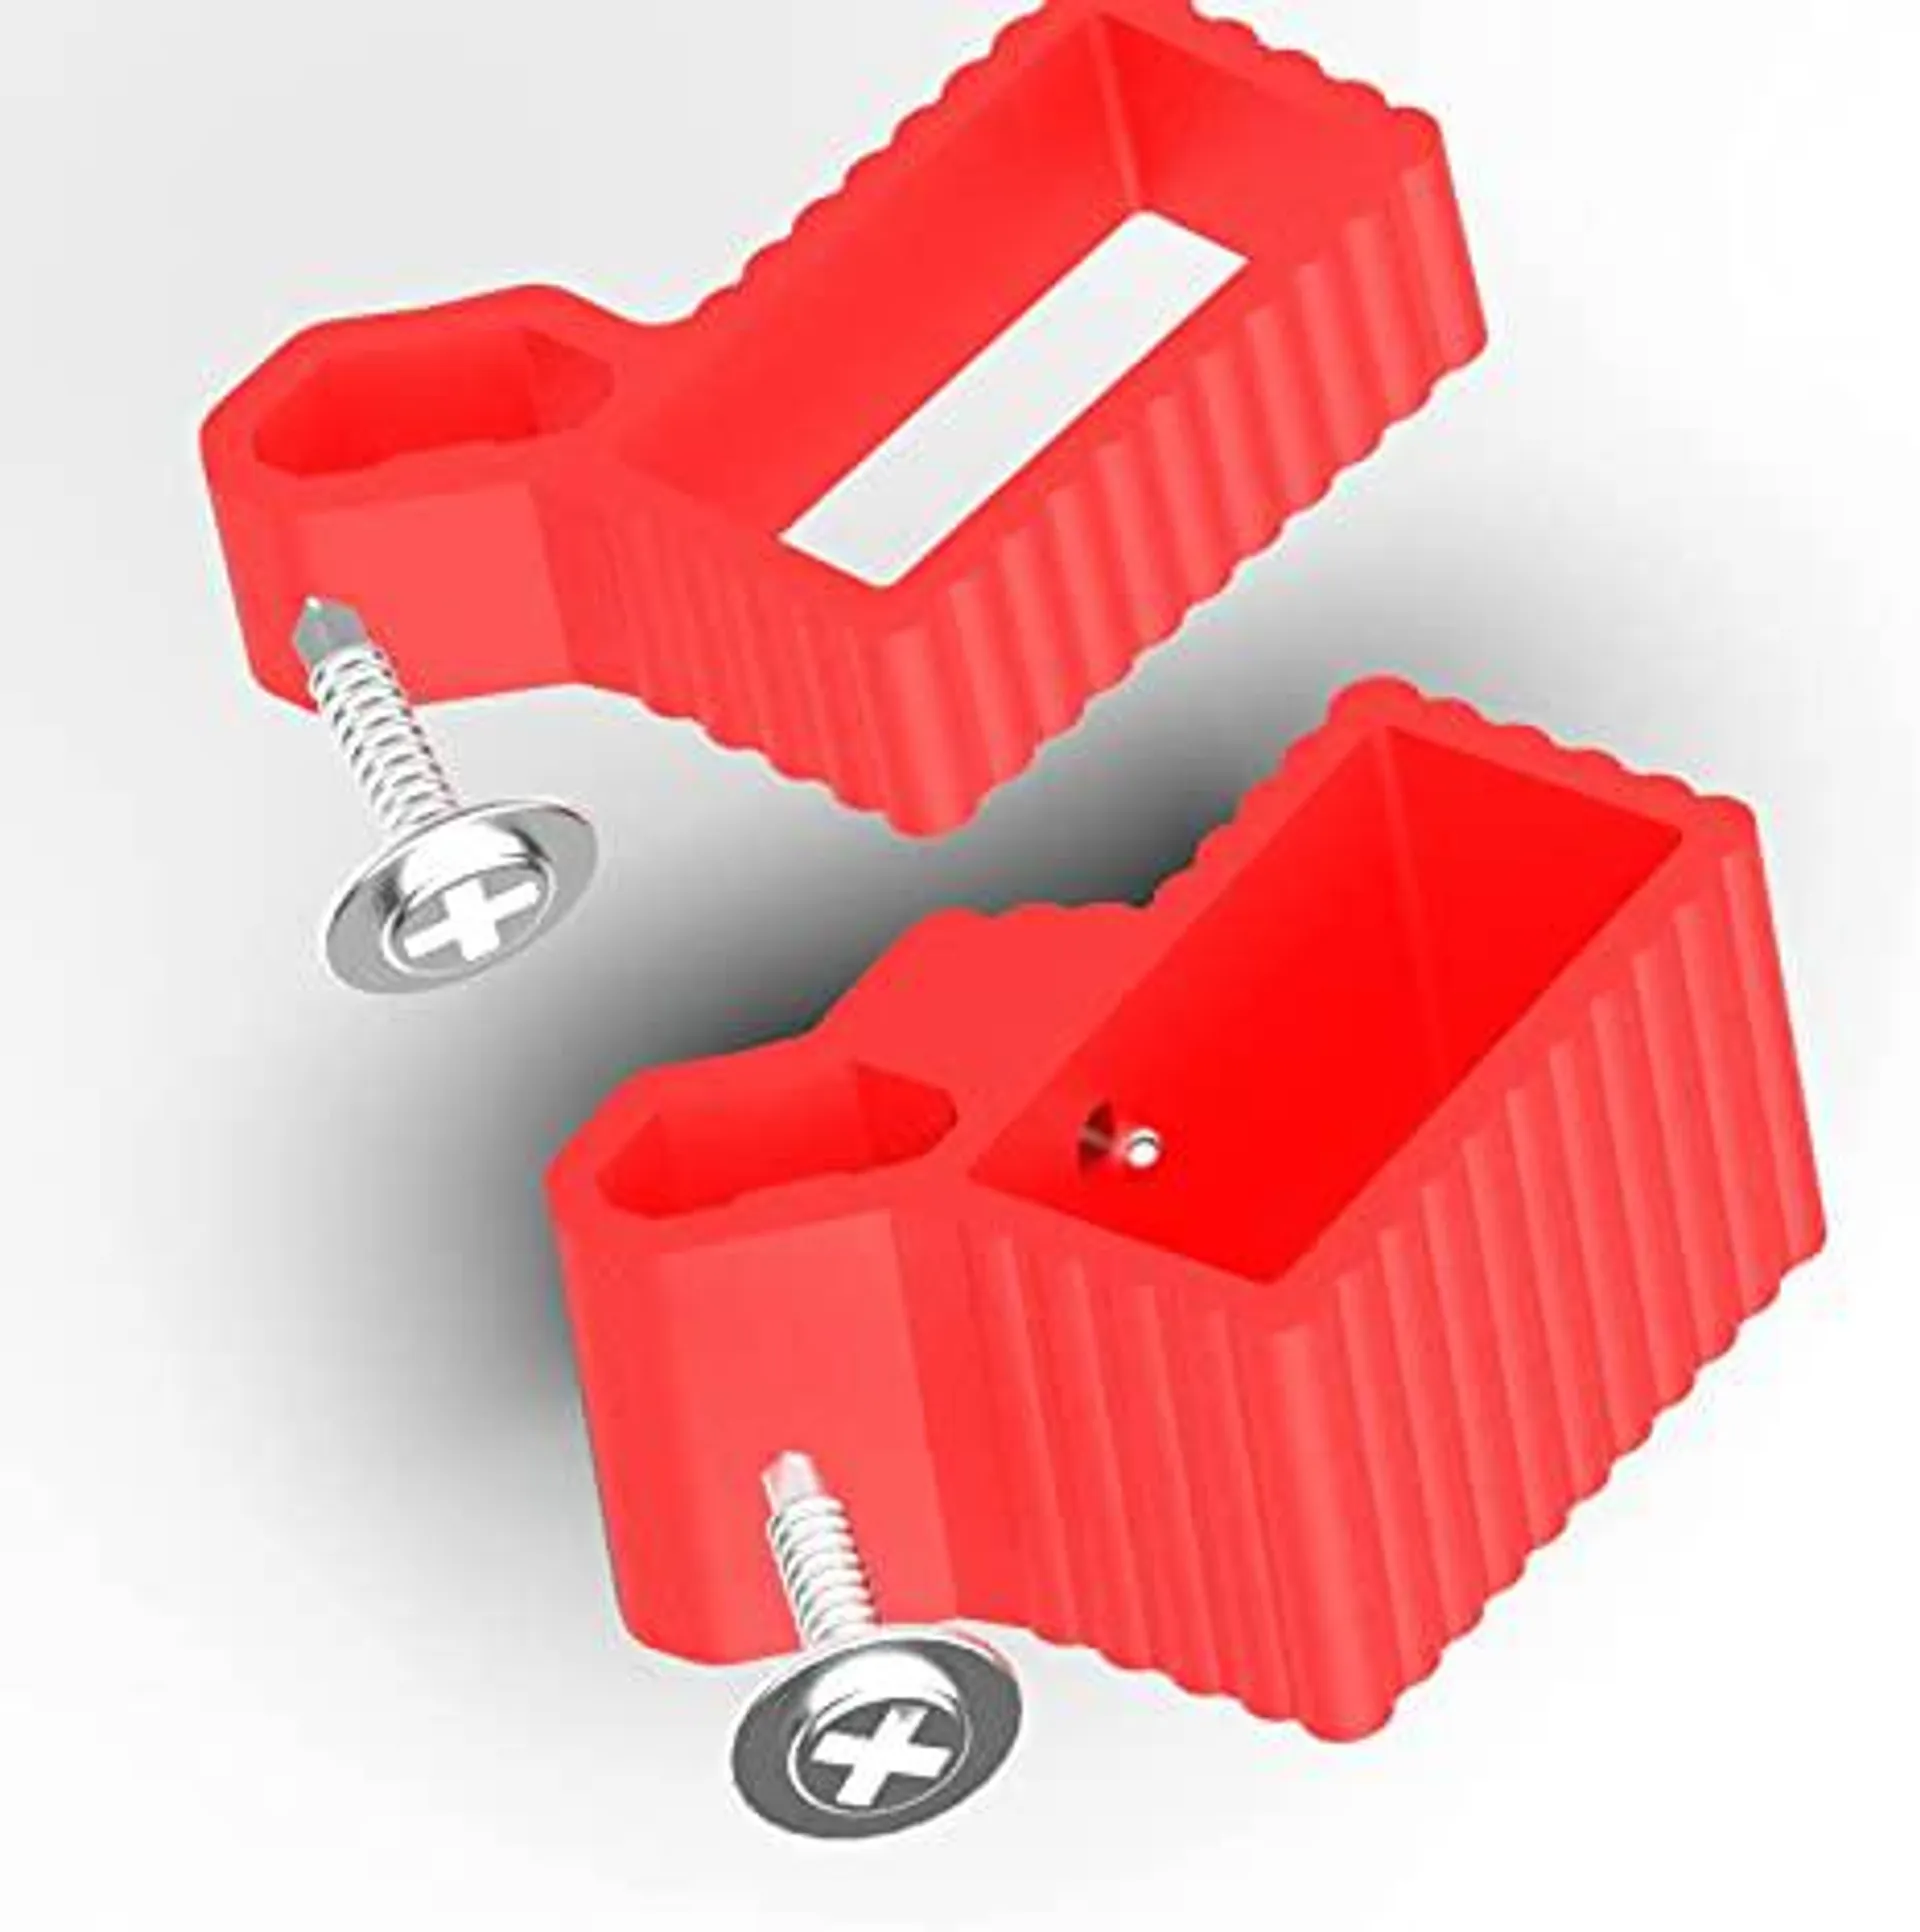 NyVoozy Level Holder Compatible with Milwaukee Packout Tool Box, 2pcs Heavy Duty Level Holder Organizer for Milwaukee Packout Toolbox (Red)